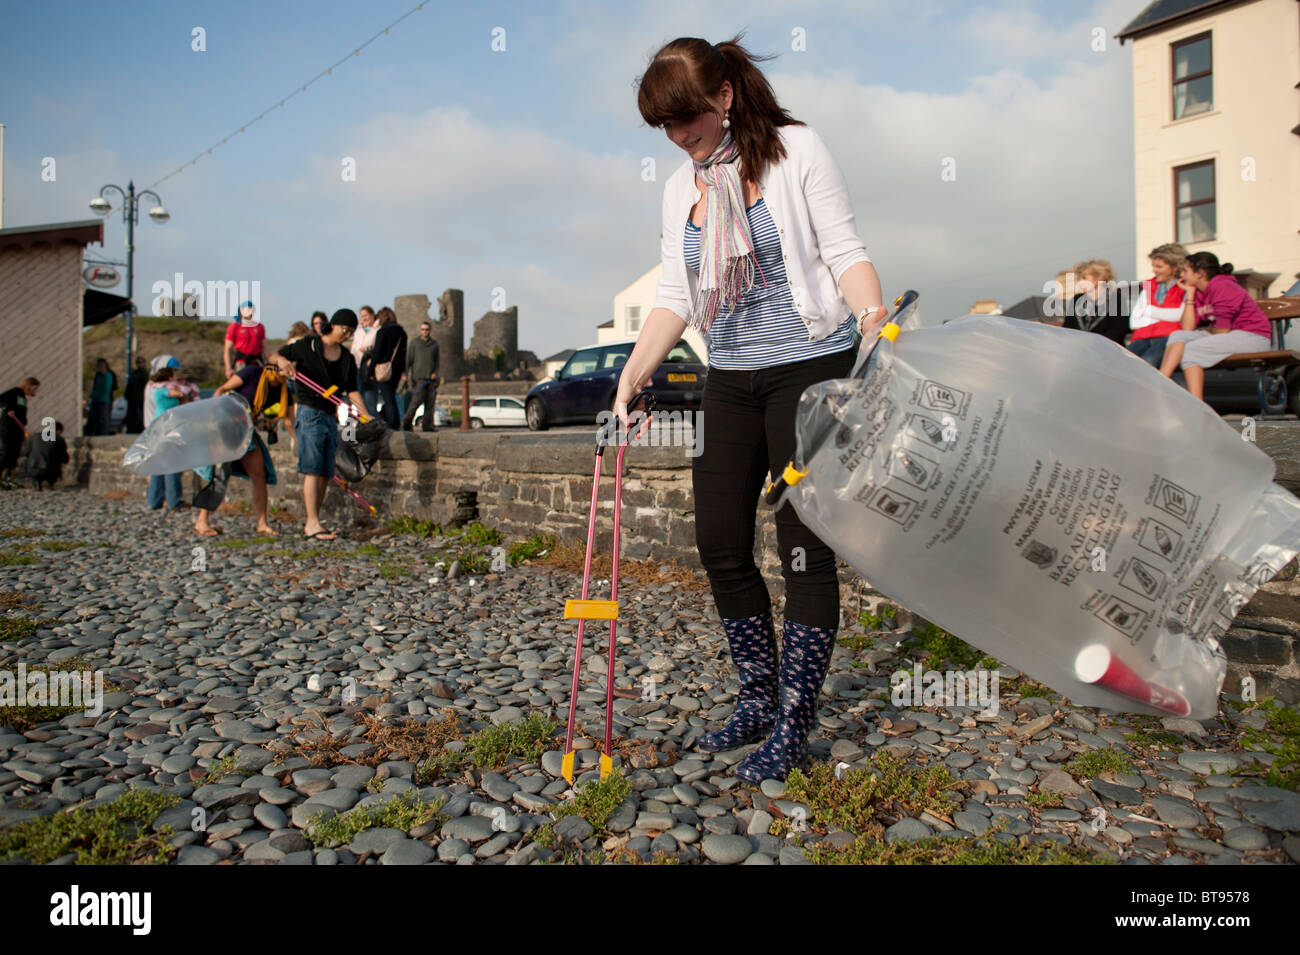 A group of Aberystwyth University 'coast care group' student volunteers picking up litter off the beach, Wales UK Stock Photo